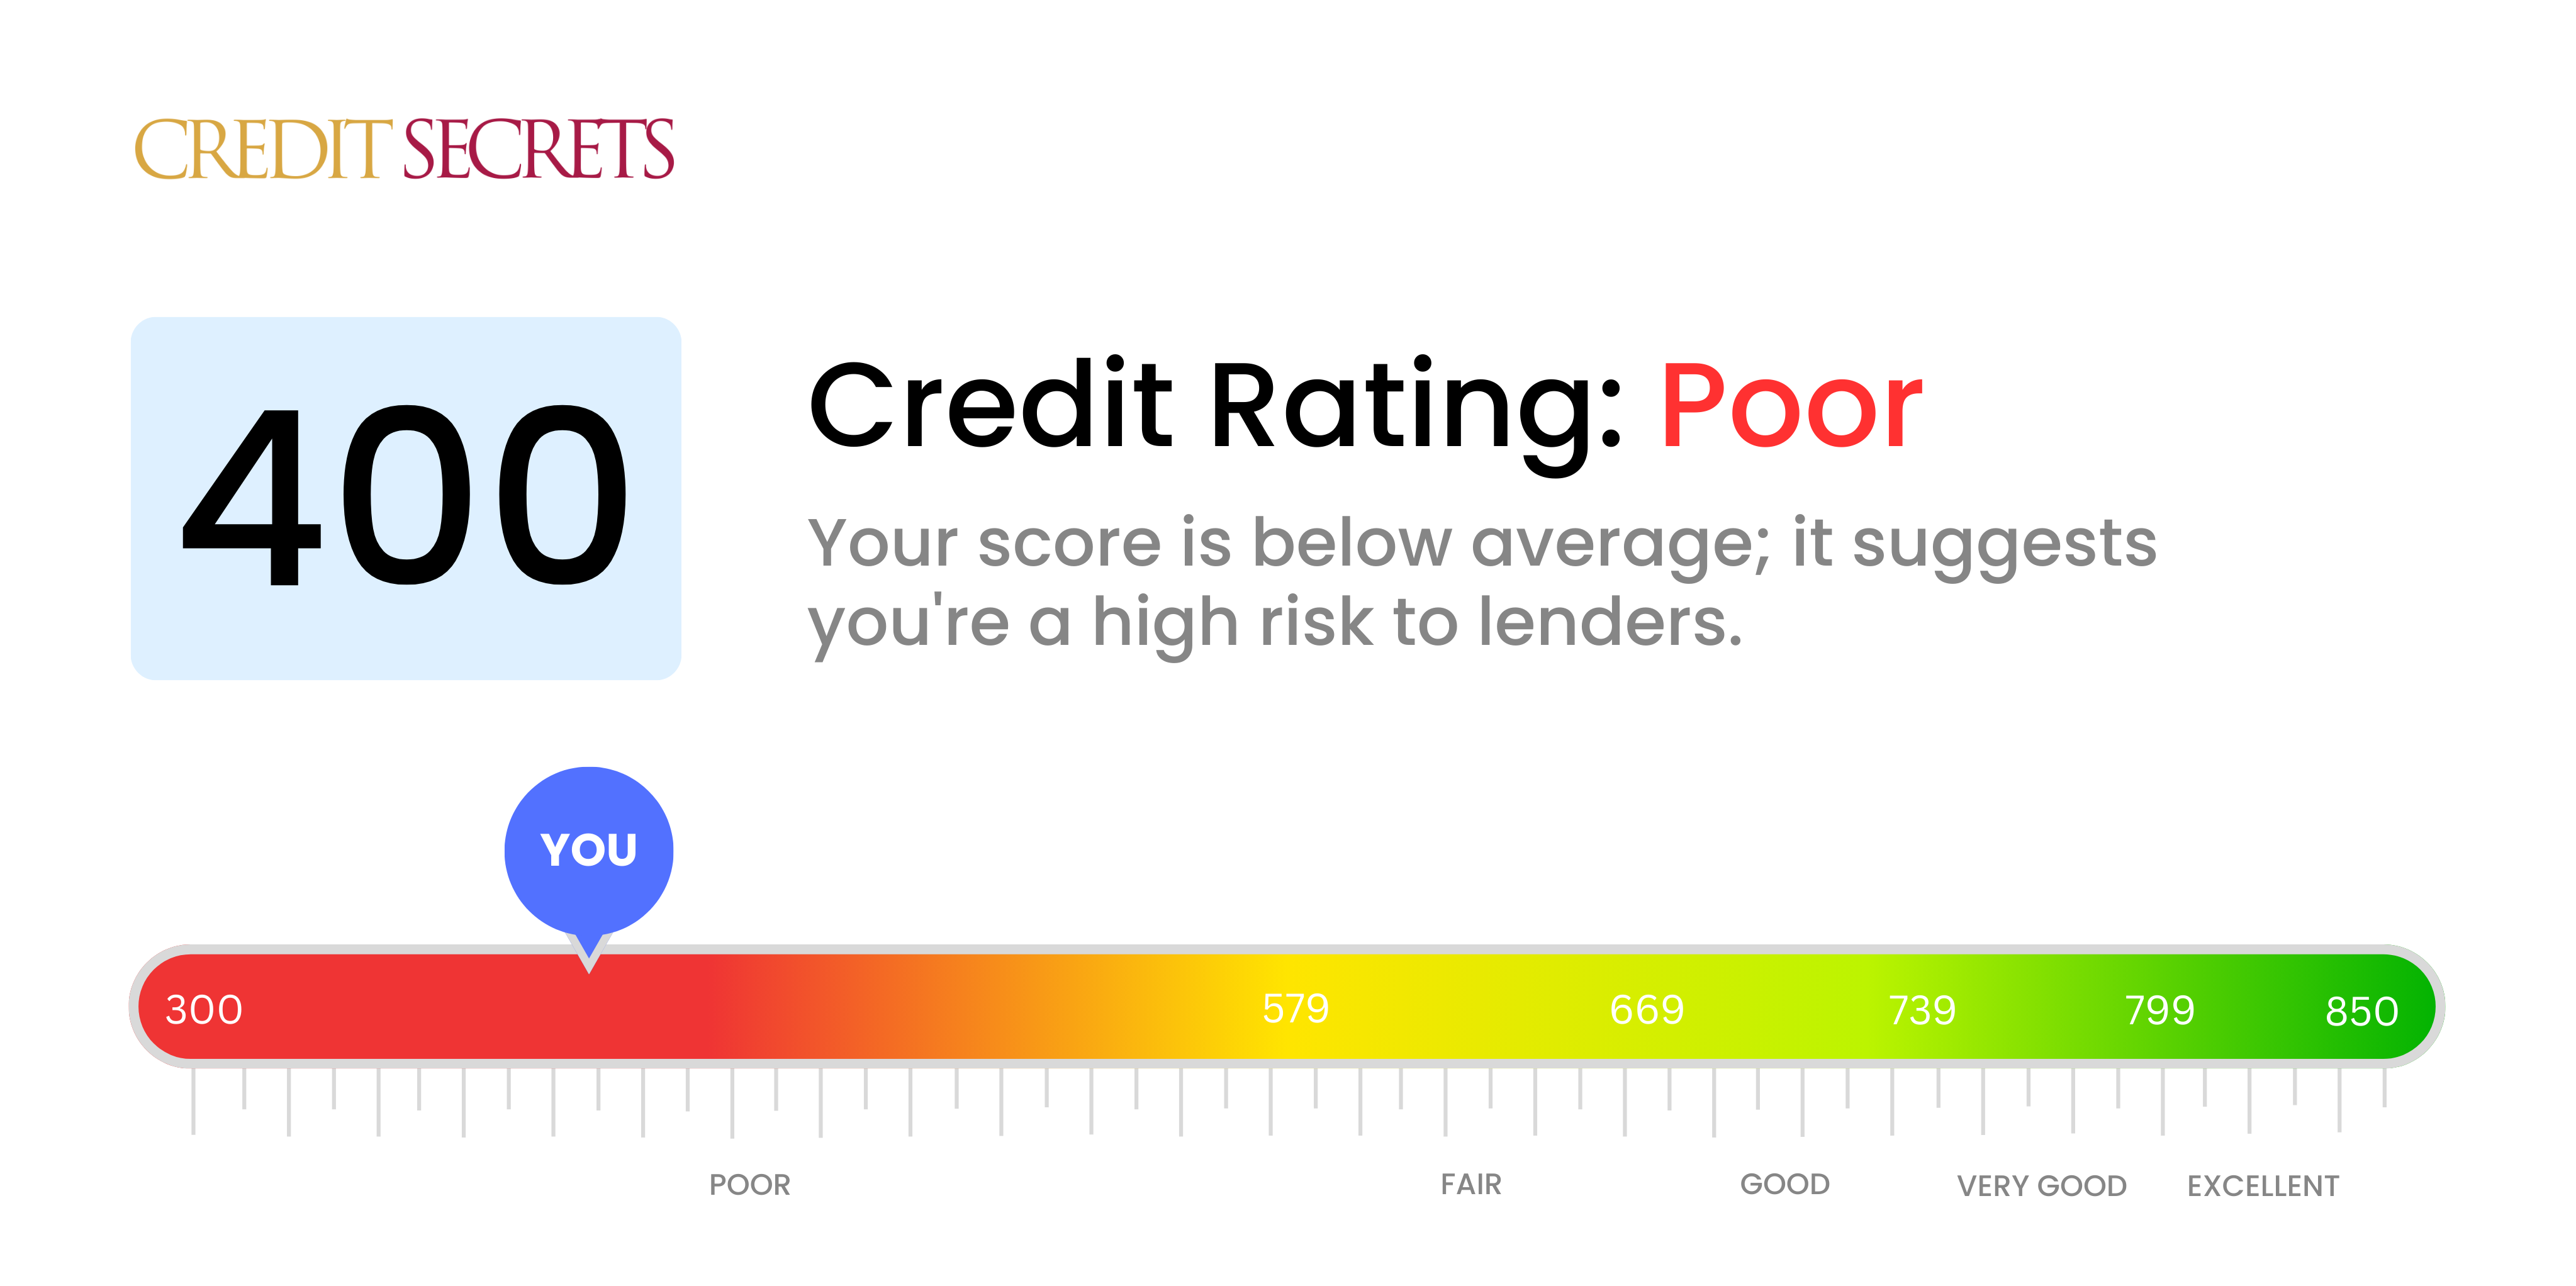 Is 400 a good credit score?